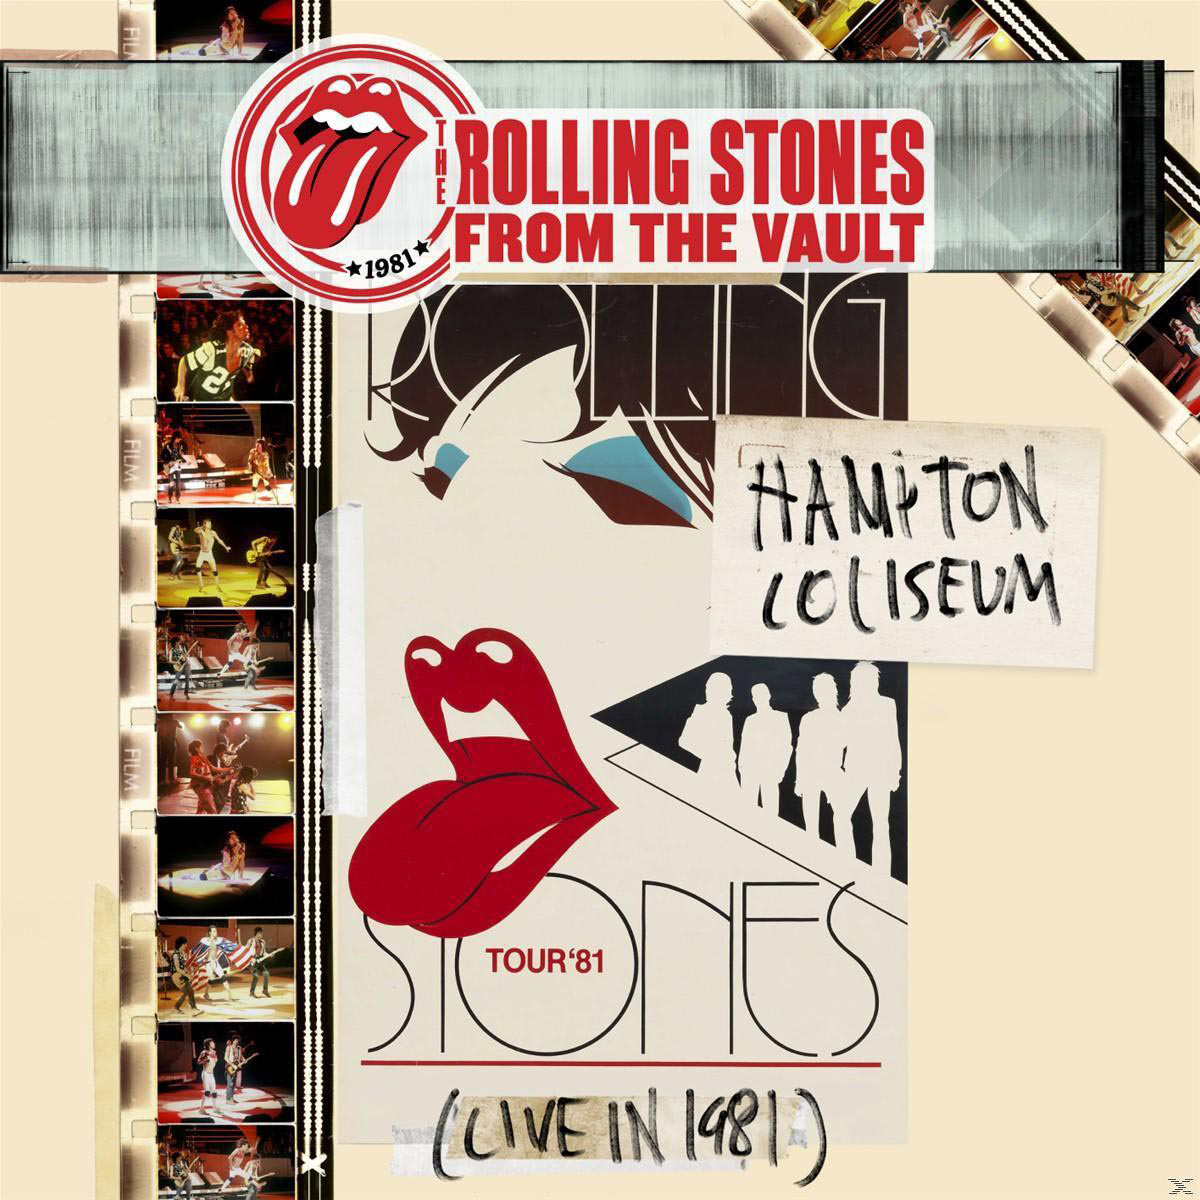 The Rolling Stones - From + - Vault-Hampton Coliseum CD) Live The 1981 In (DVD